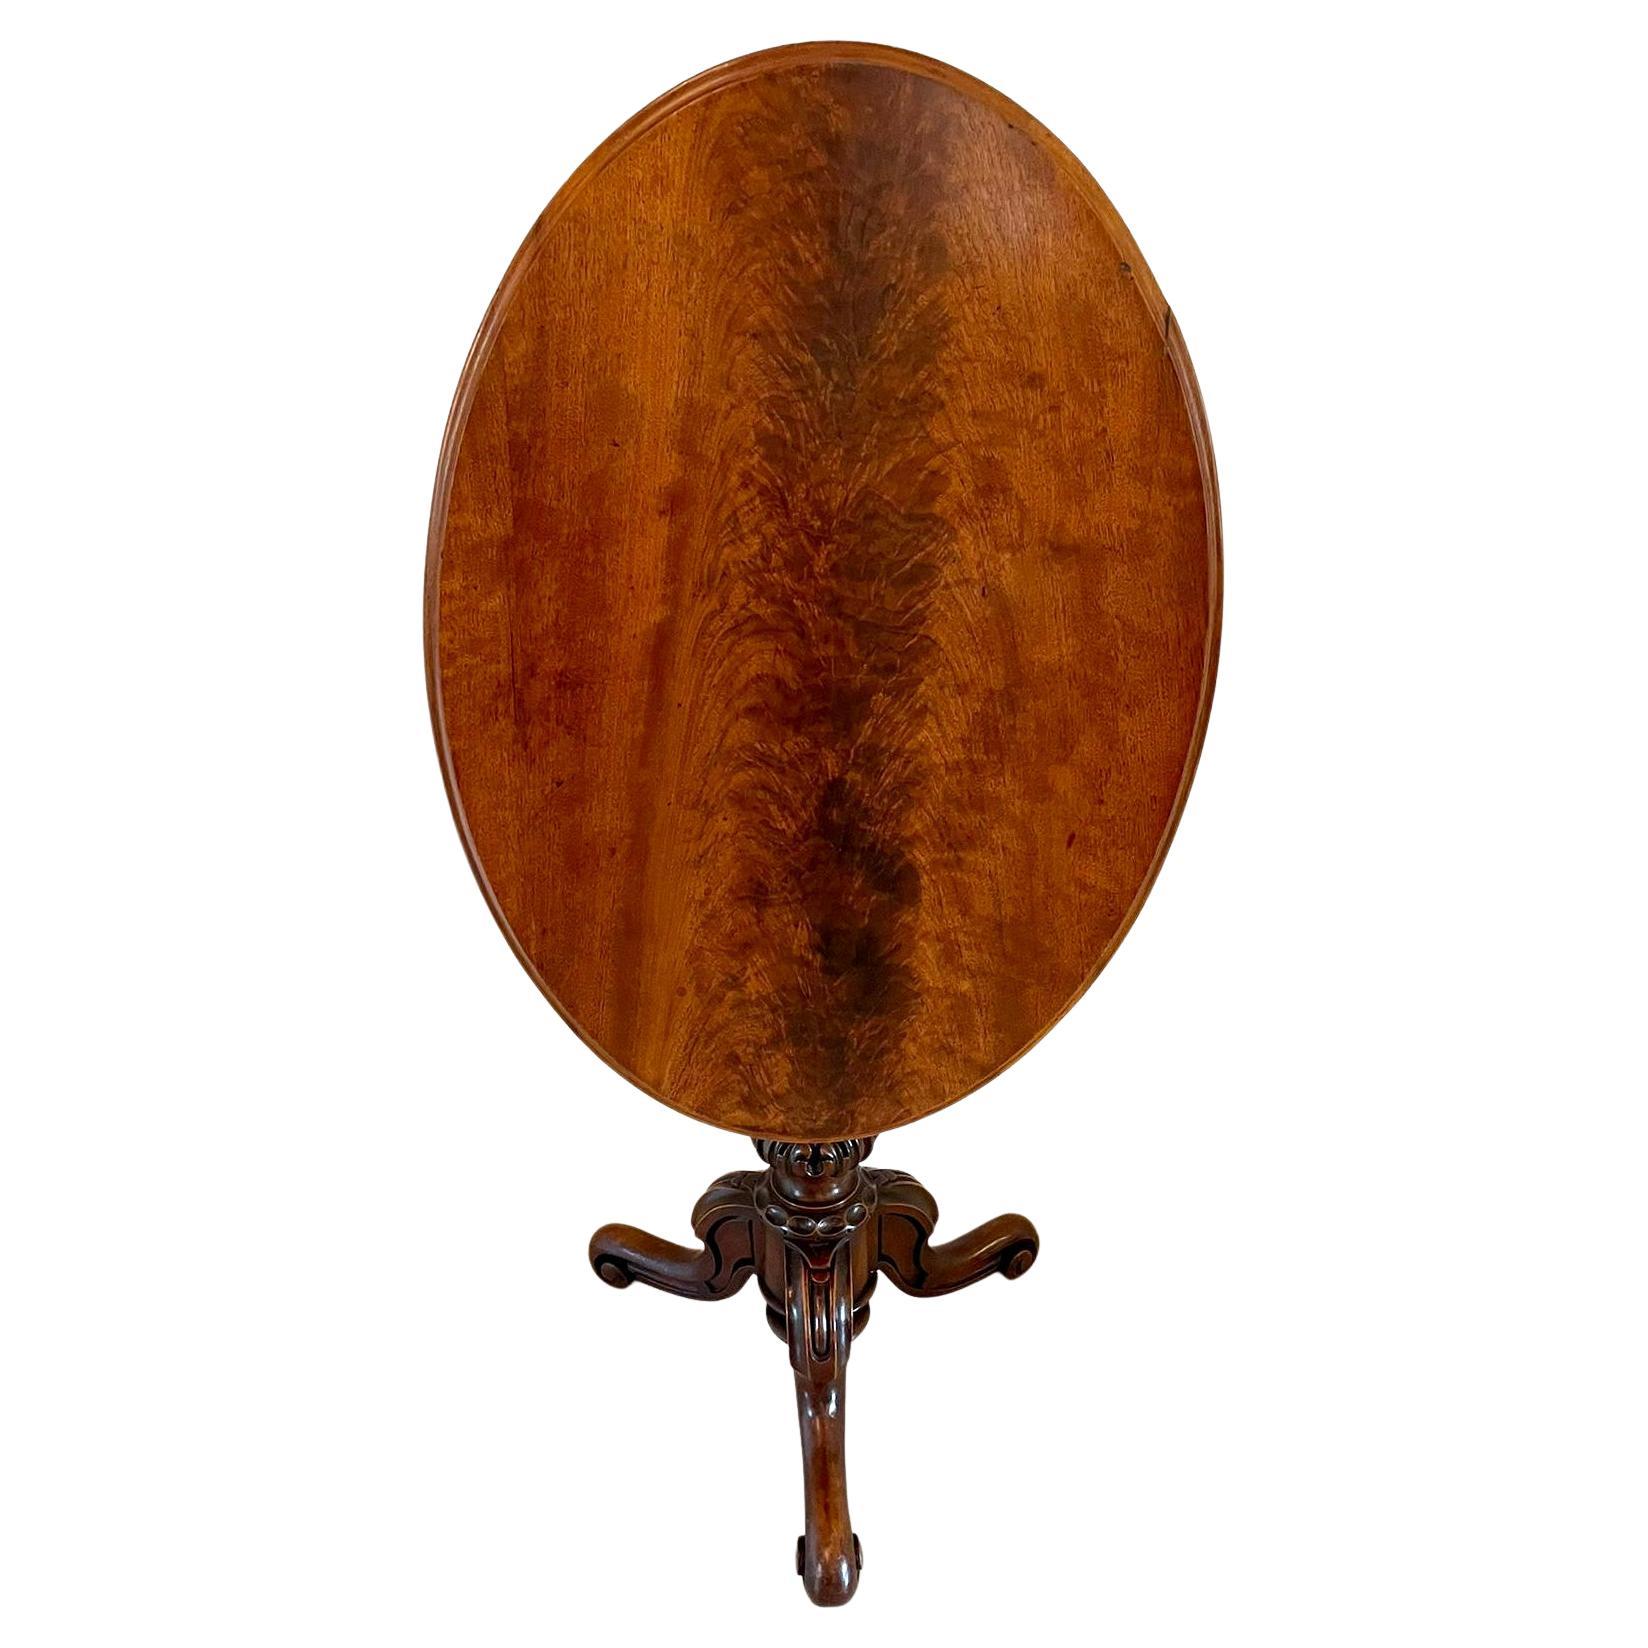 Quality 19th Century Antique Victorian Oval Figured Walnut Lamp Table For Sale